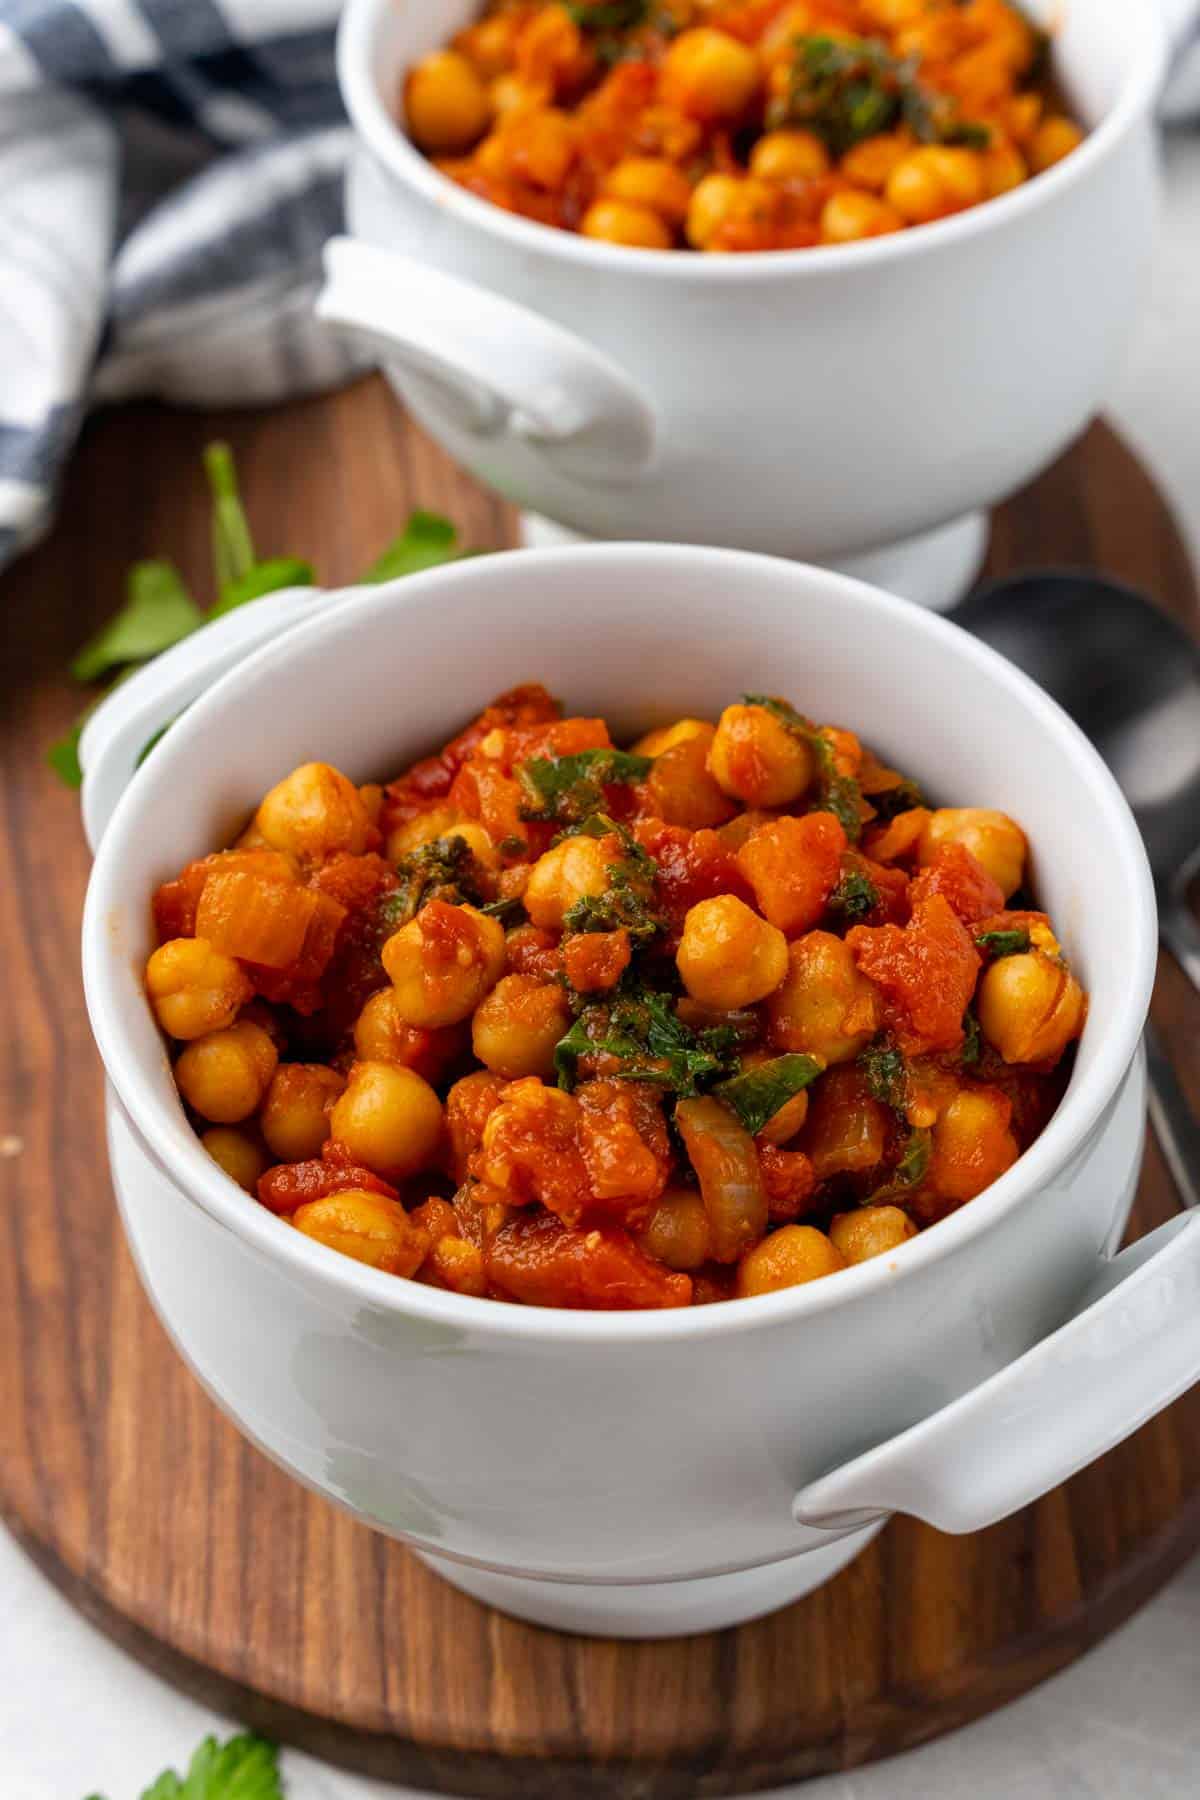 Closeup of stewed chickpeas and tomatoes with kale in a small white bowl with handles on a wooden serving tray with a second bowl and blue striped cloth napkin in the background